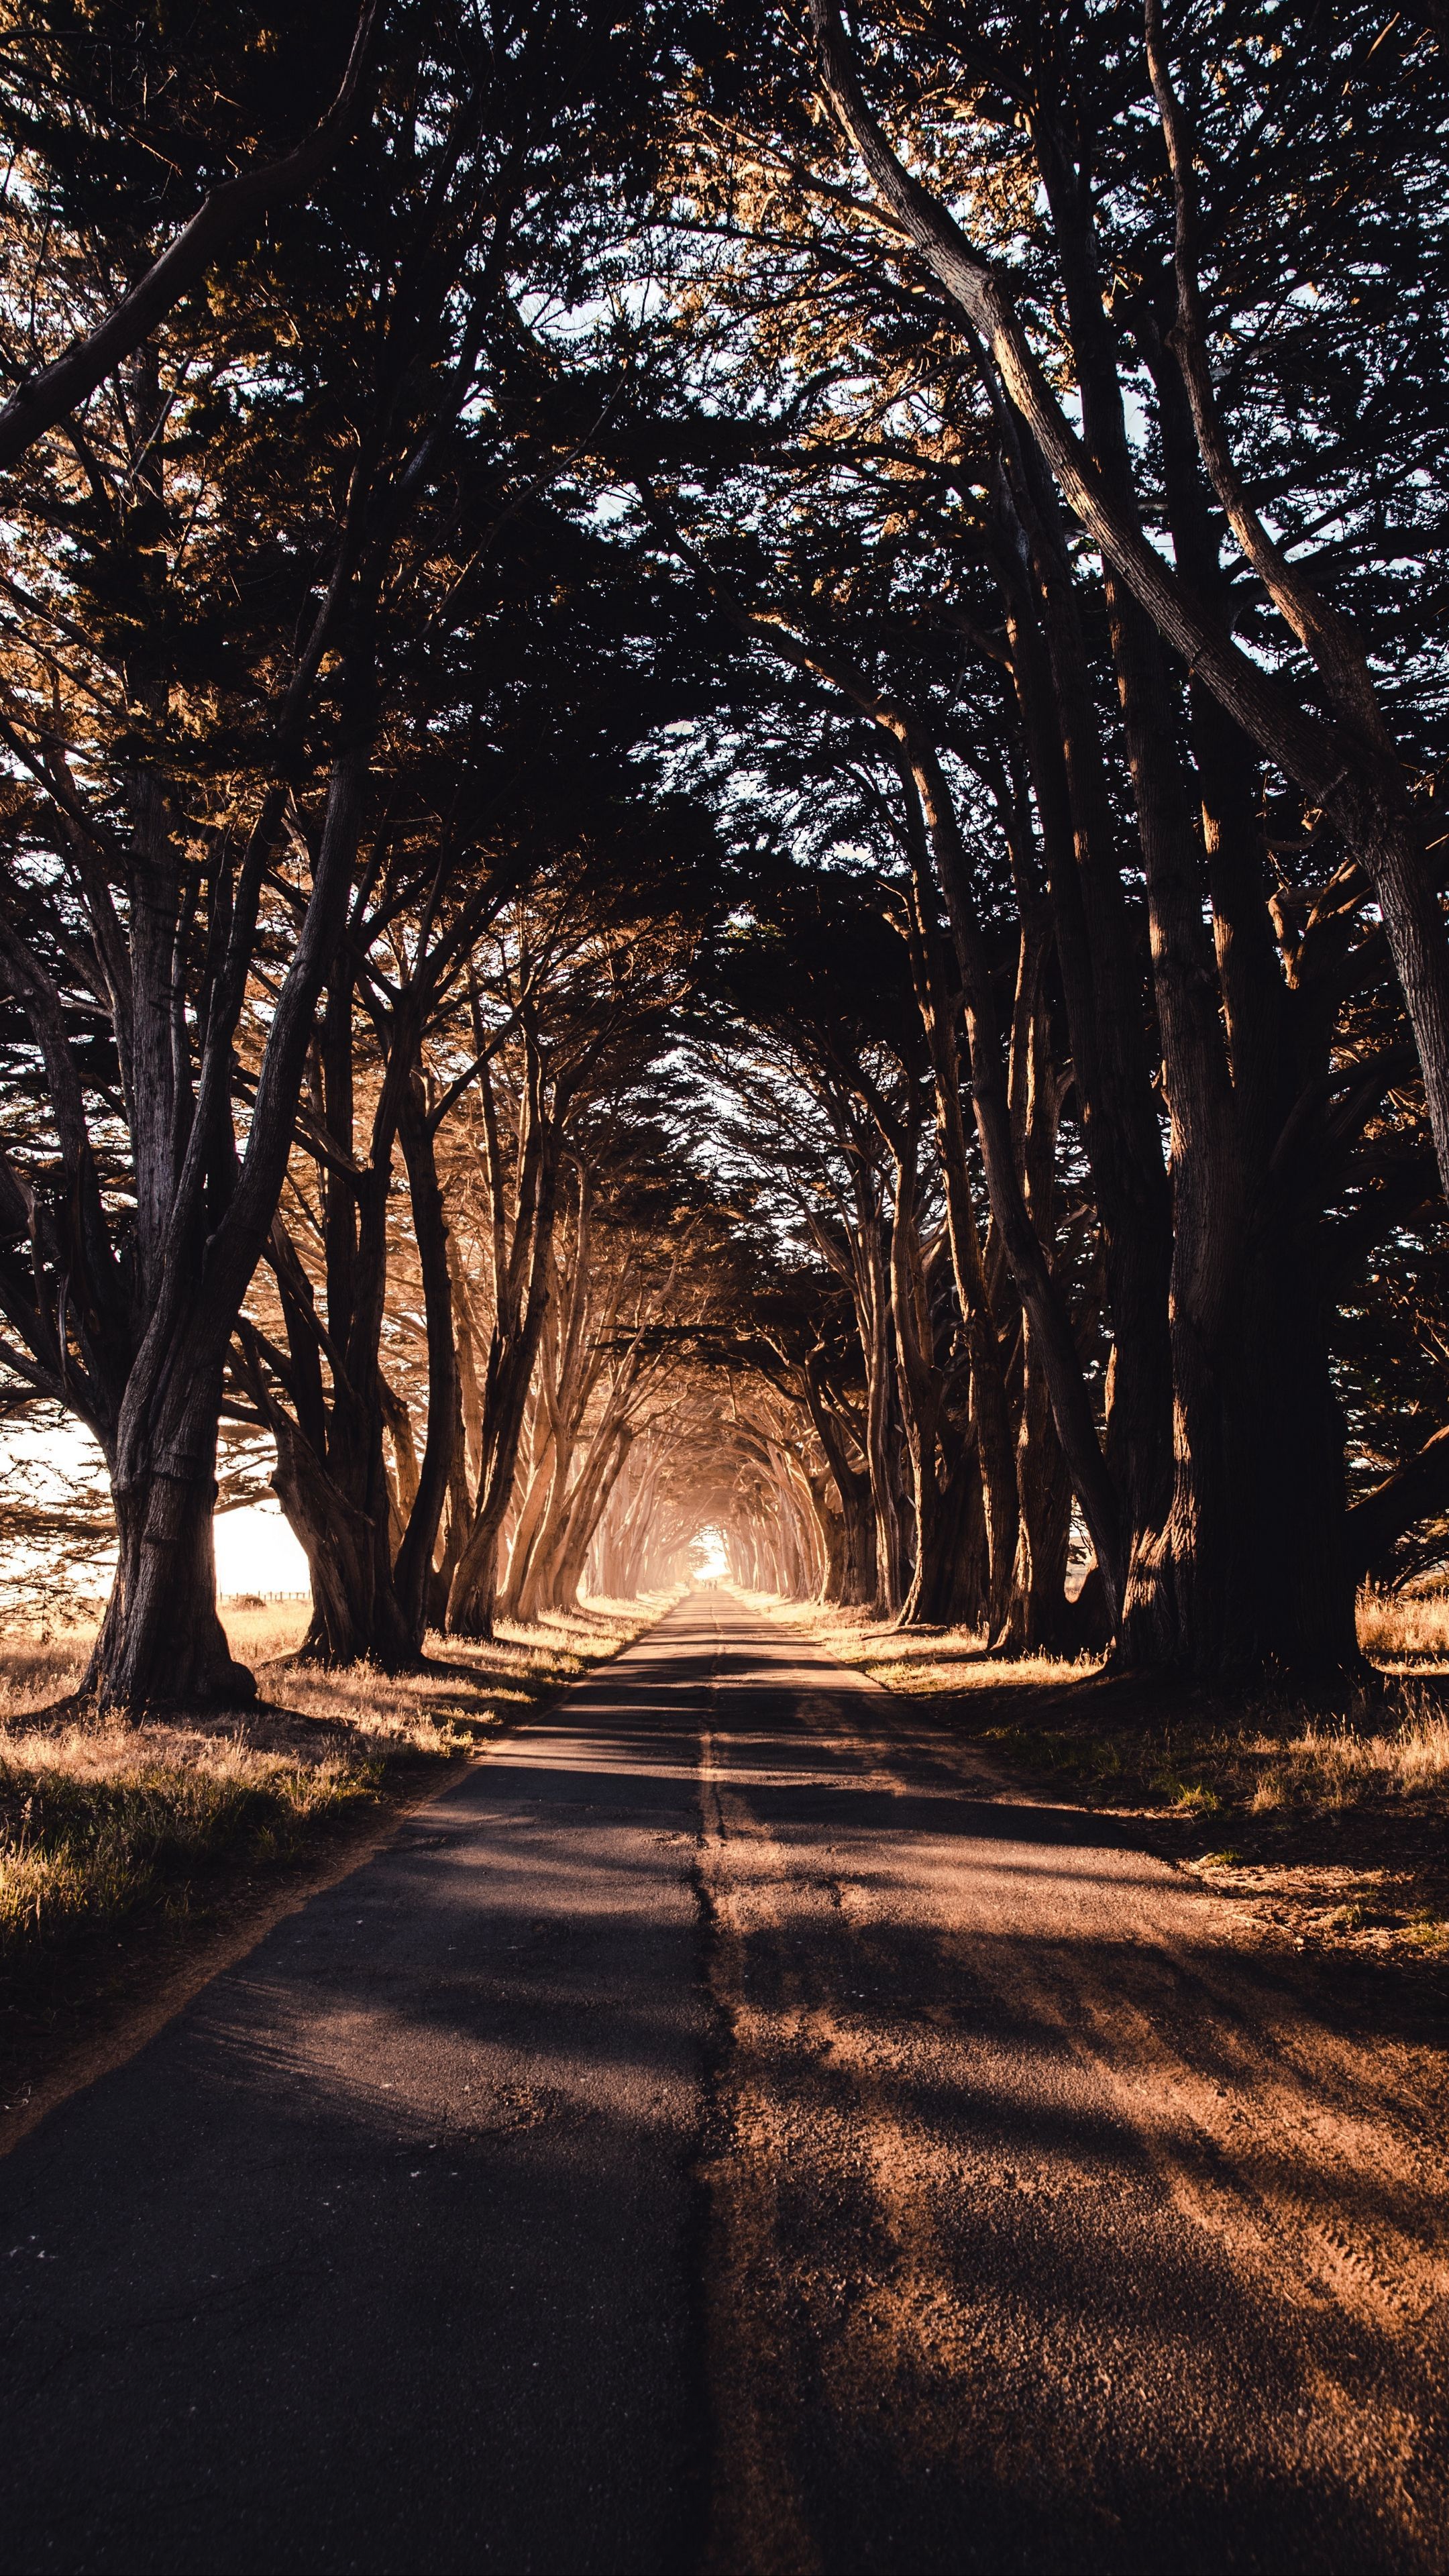 Nature #road #trees #shadow #wallpaper HD 4k background for android